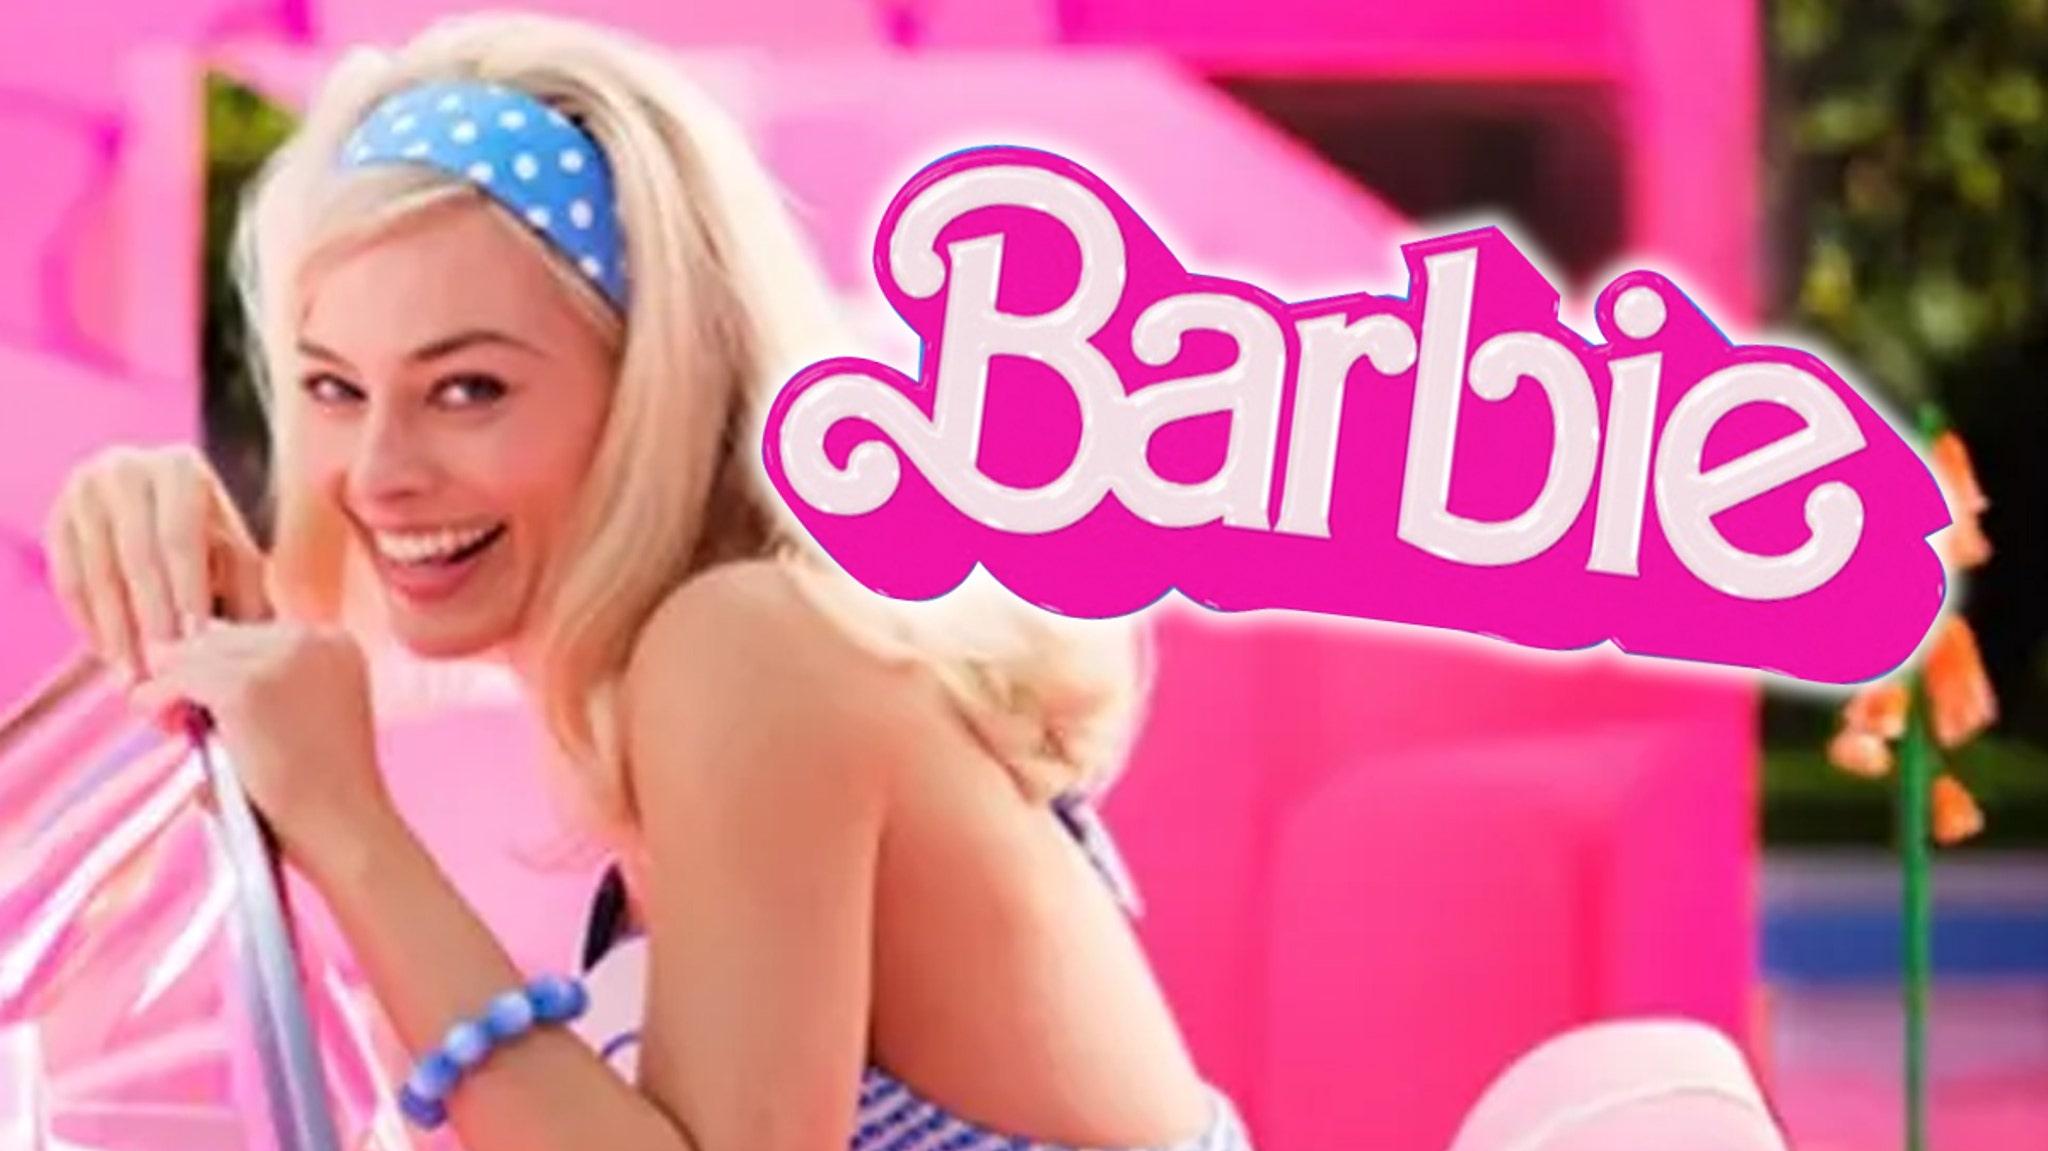 Woman Who Inspired Barbie Doll Gives Margot Robbie S Movie